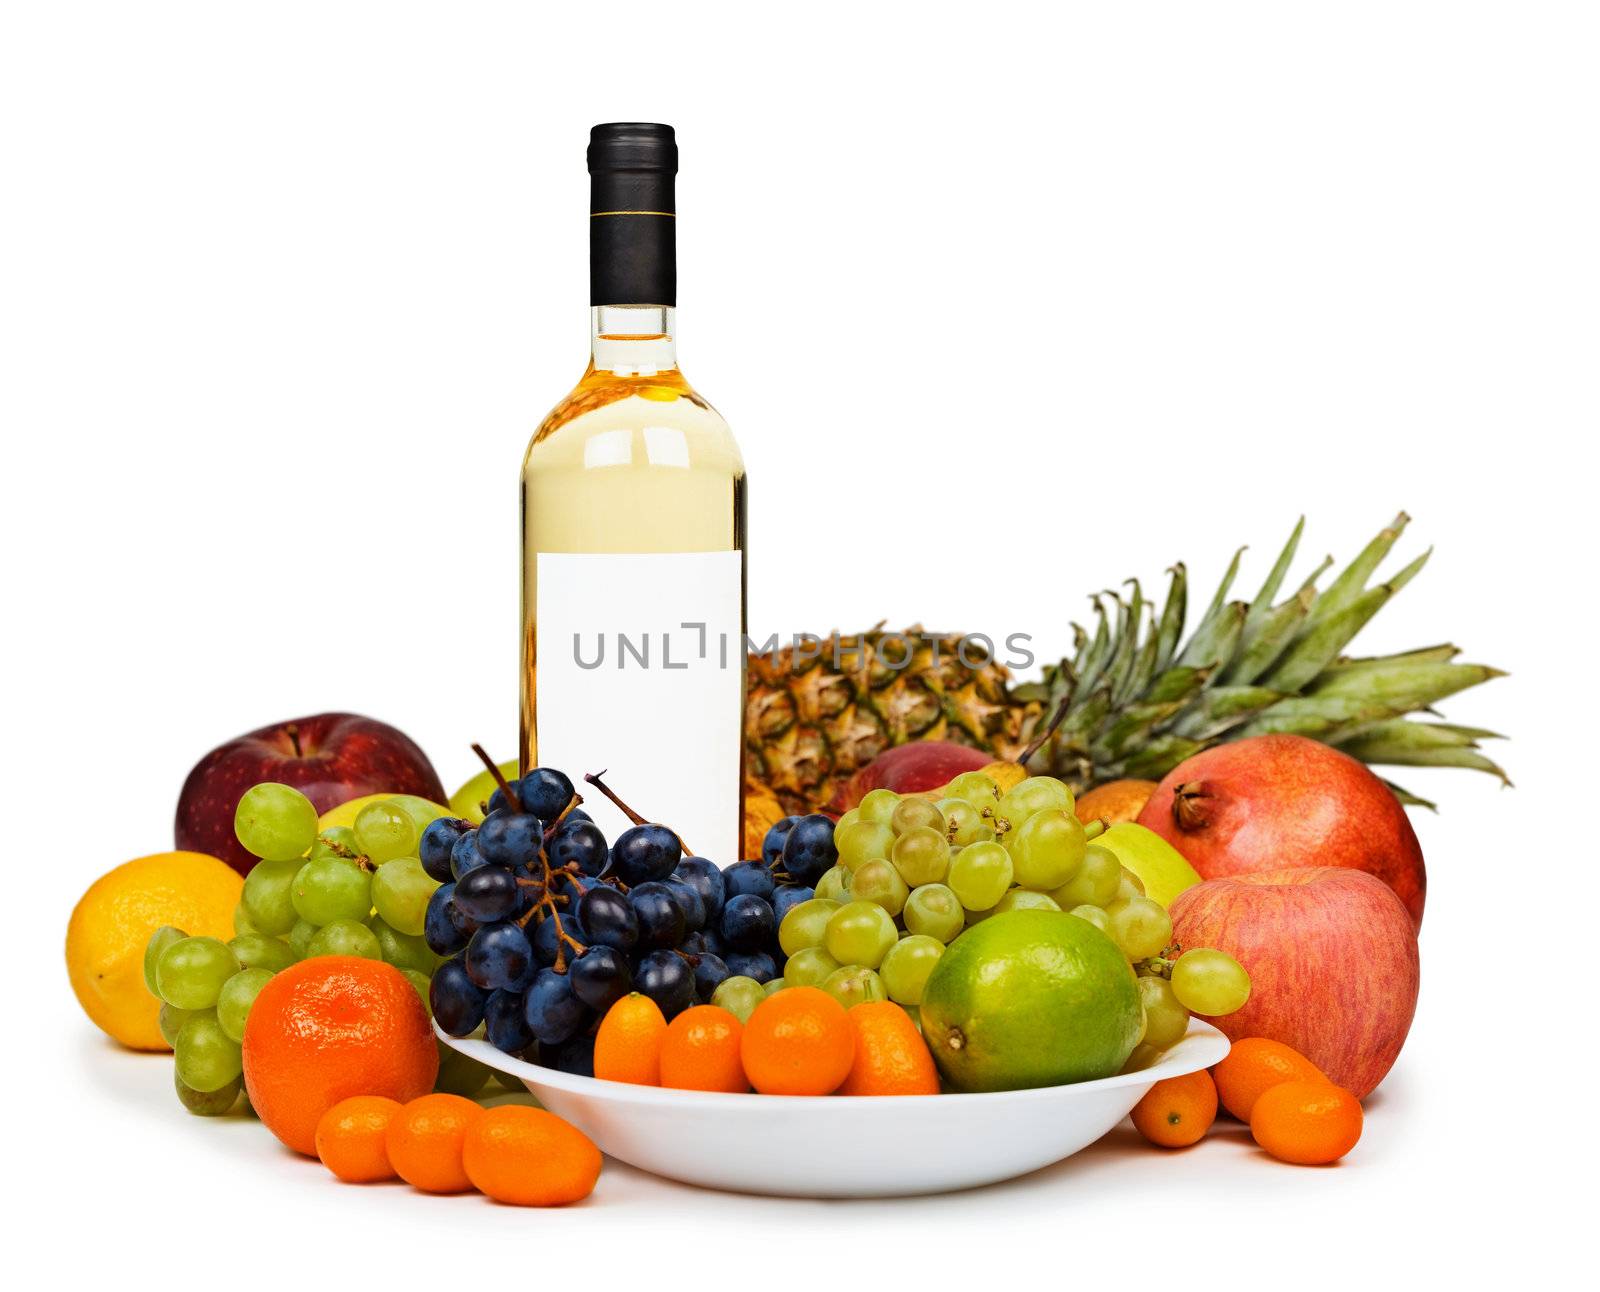 Still life - bottle of white wine among fruits on white by pzaxe